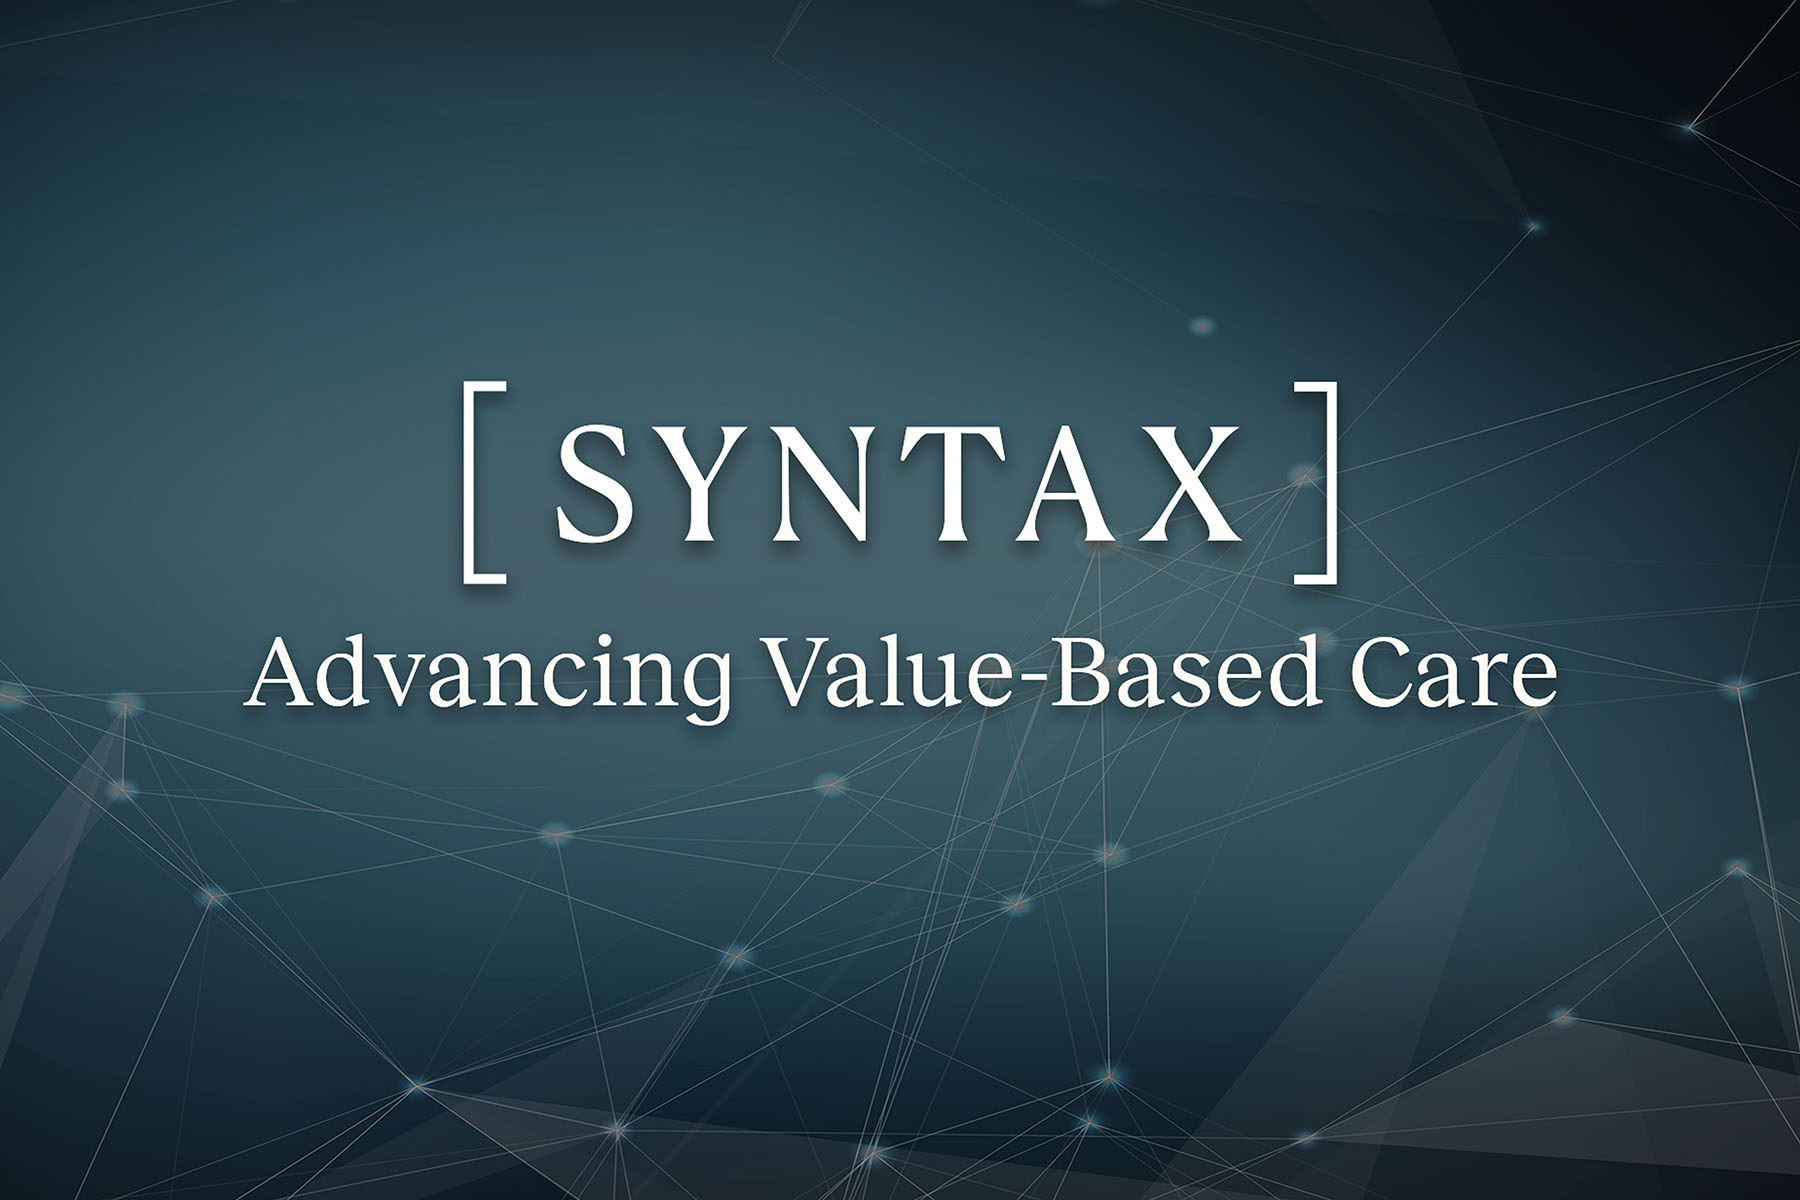 Syntax Health company logo with tagline Advancing Value-Based Care